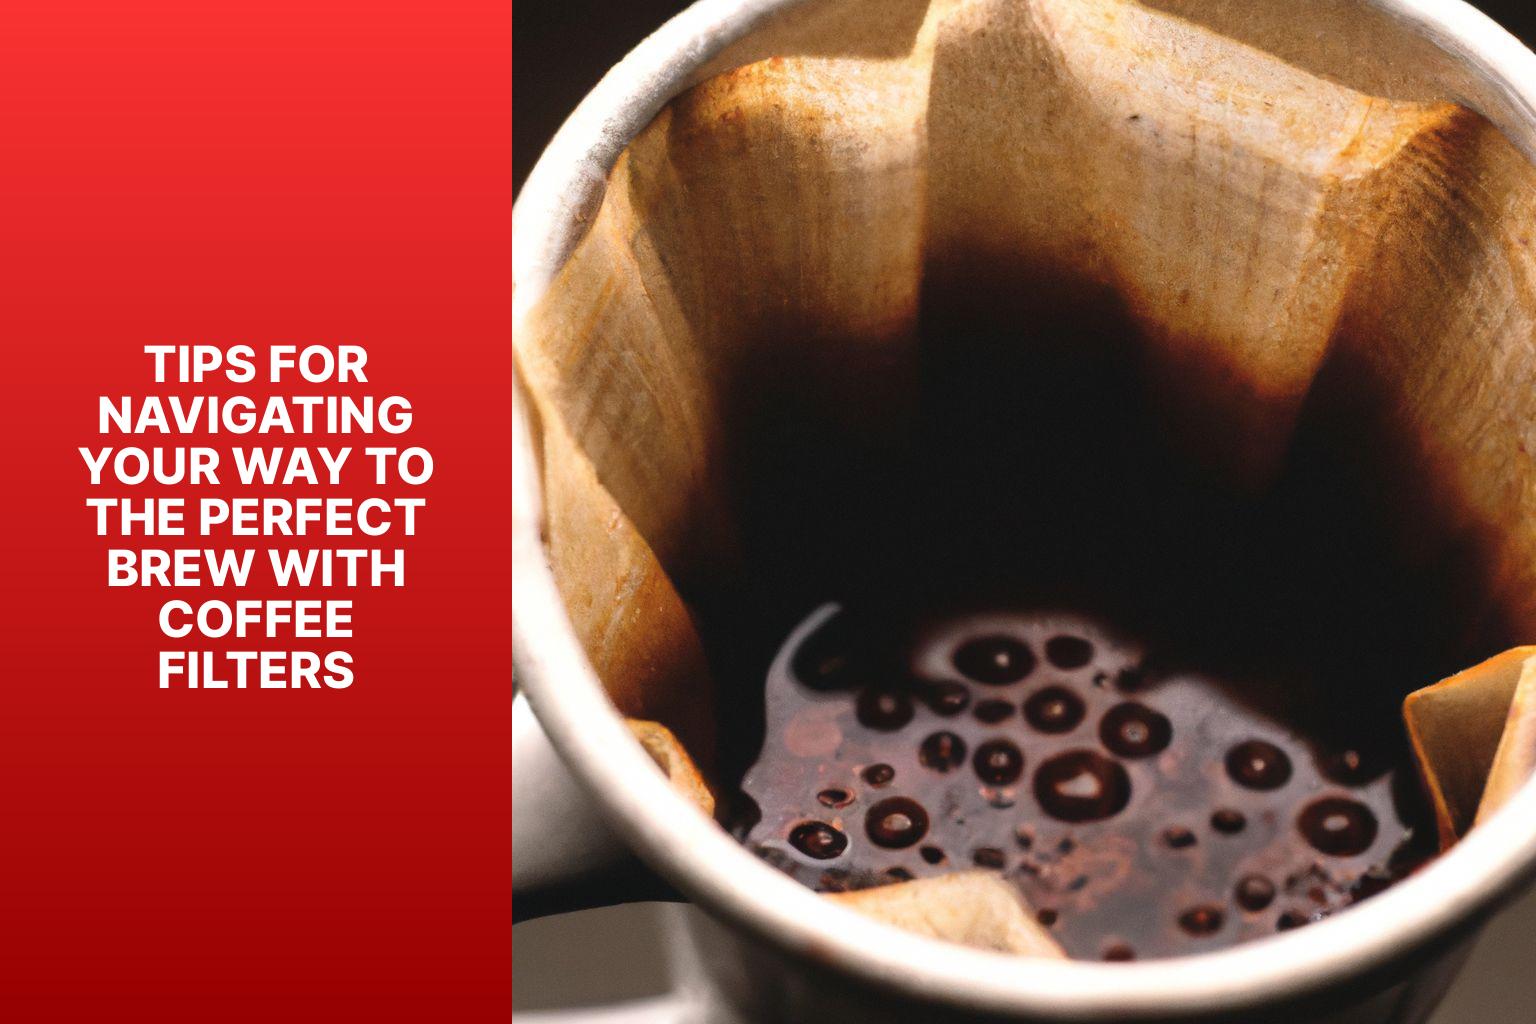 Tips for Navigating Your Way to the Perfect Brew with Coffee Filters - Coffee Filters Sizes: Navigating Your Way to the Perfect Brew 